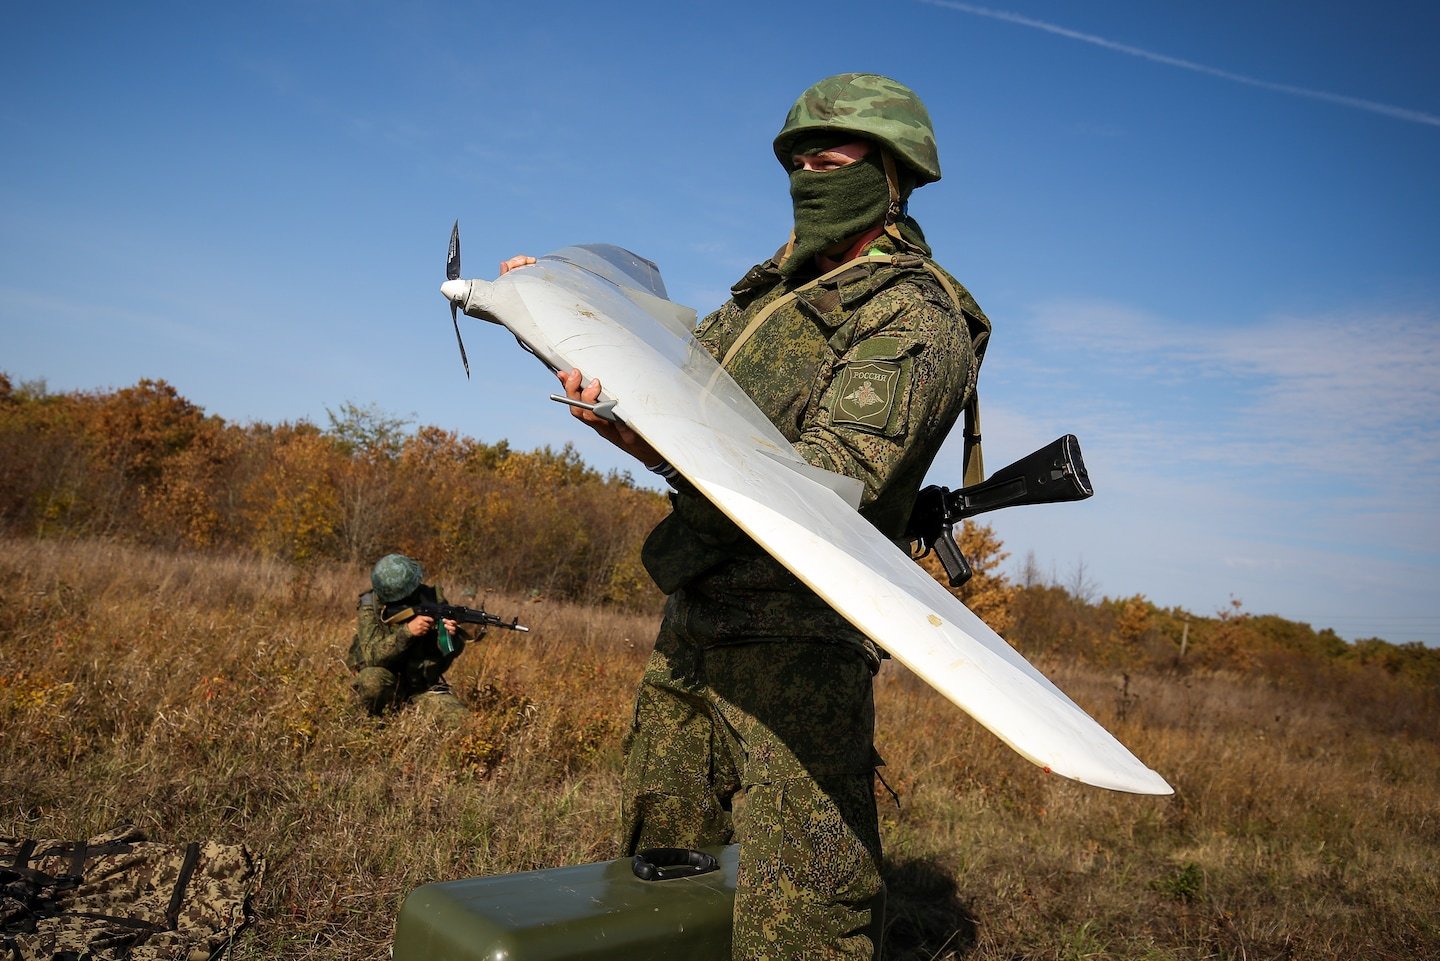 Russian drones shot down over Ukraine were full of Western parts. Can the U.S. cut them off?